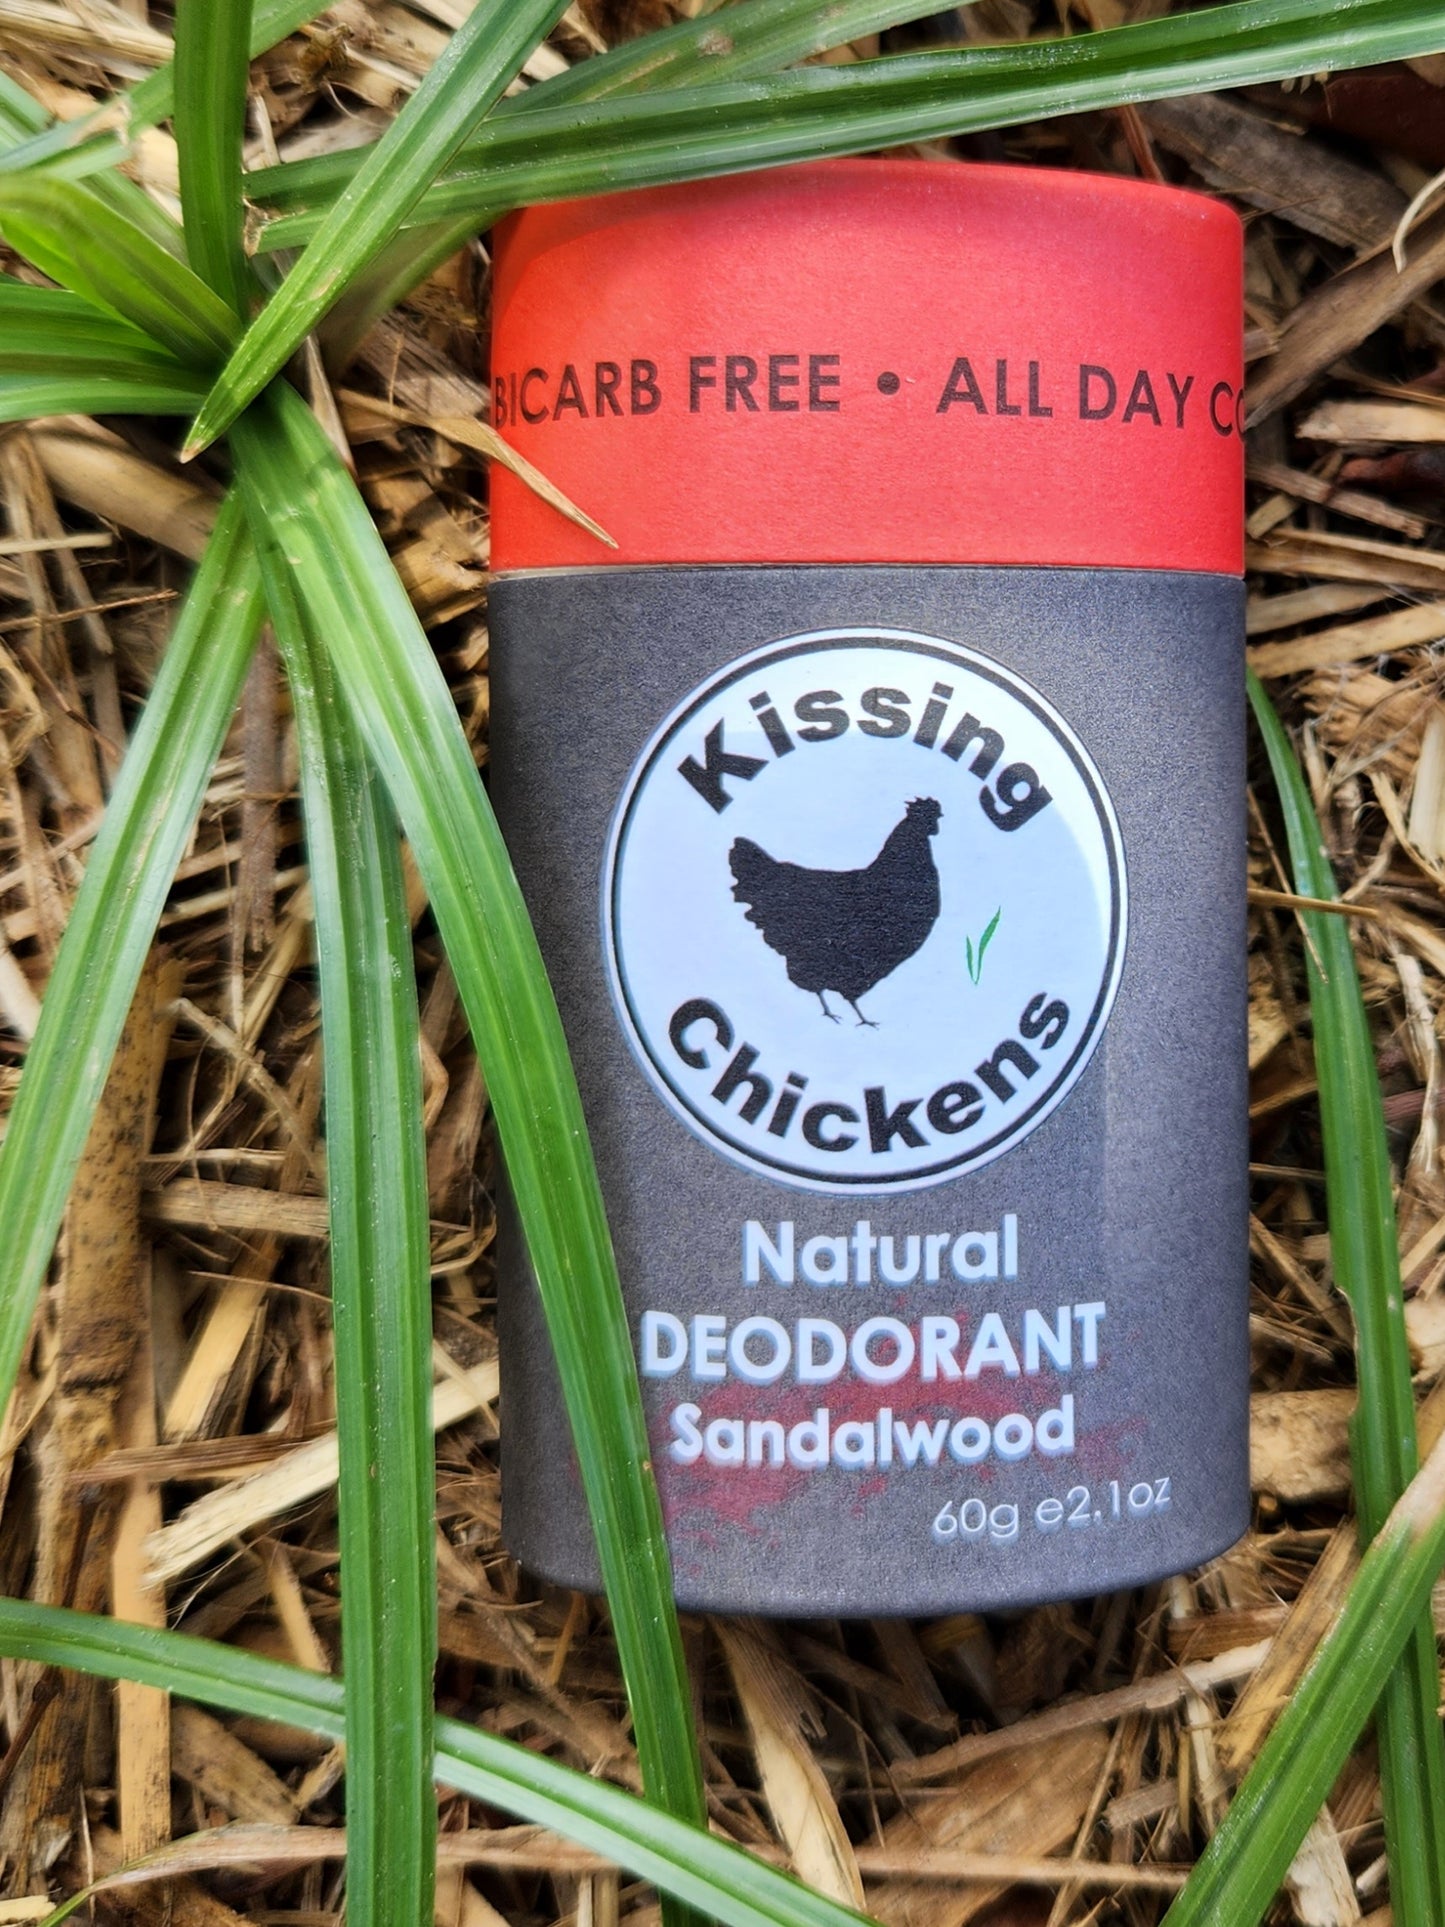 Kissing Chickens Natural Bicarb-Free Deodorant Stick Low Scent - 60g Sandalwood